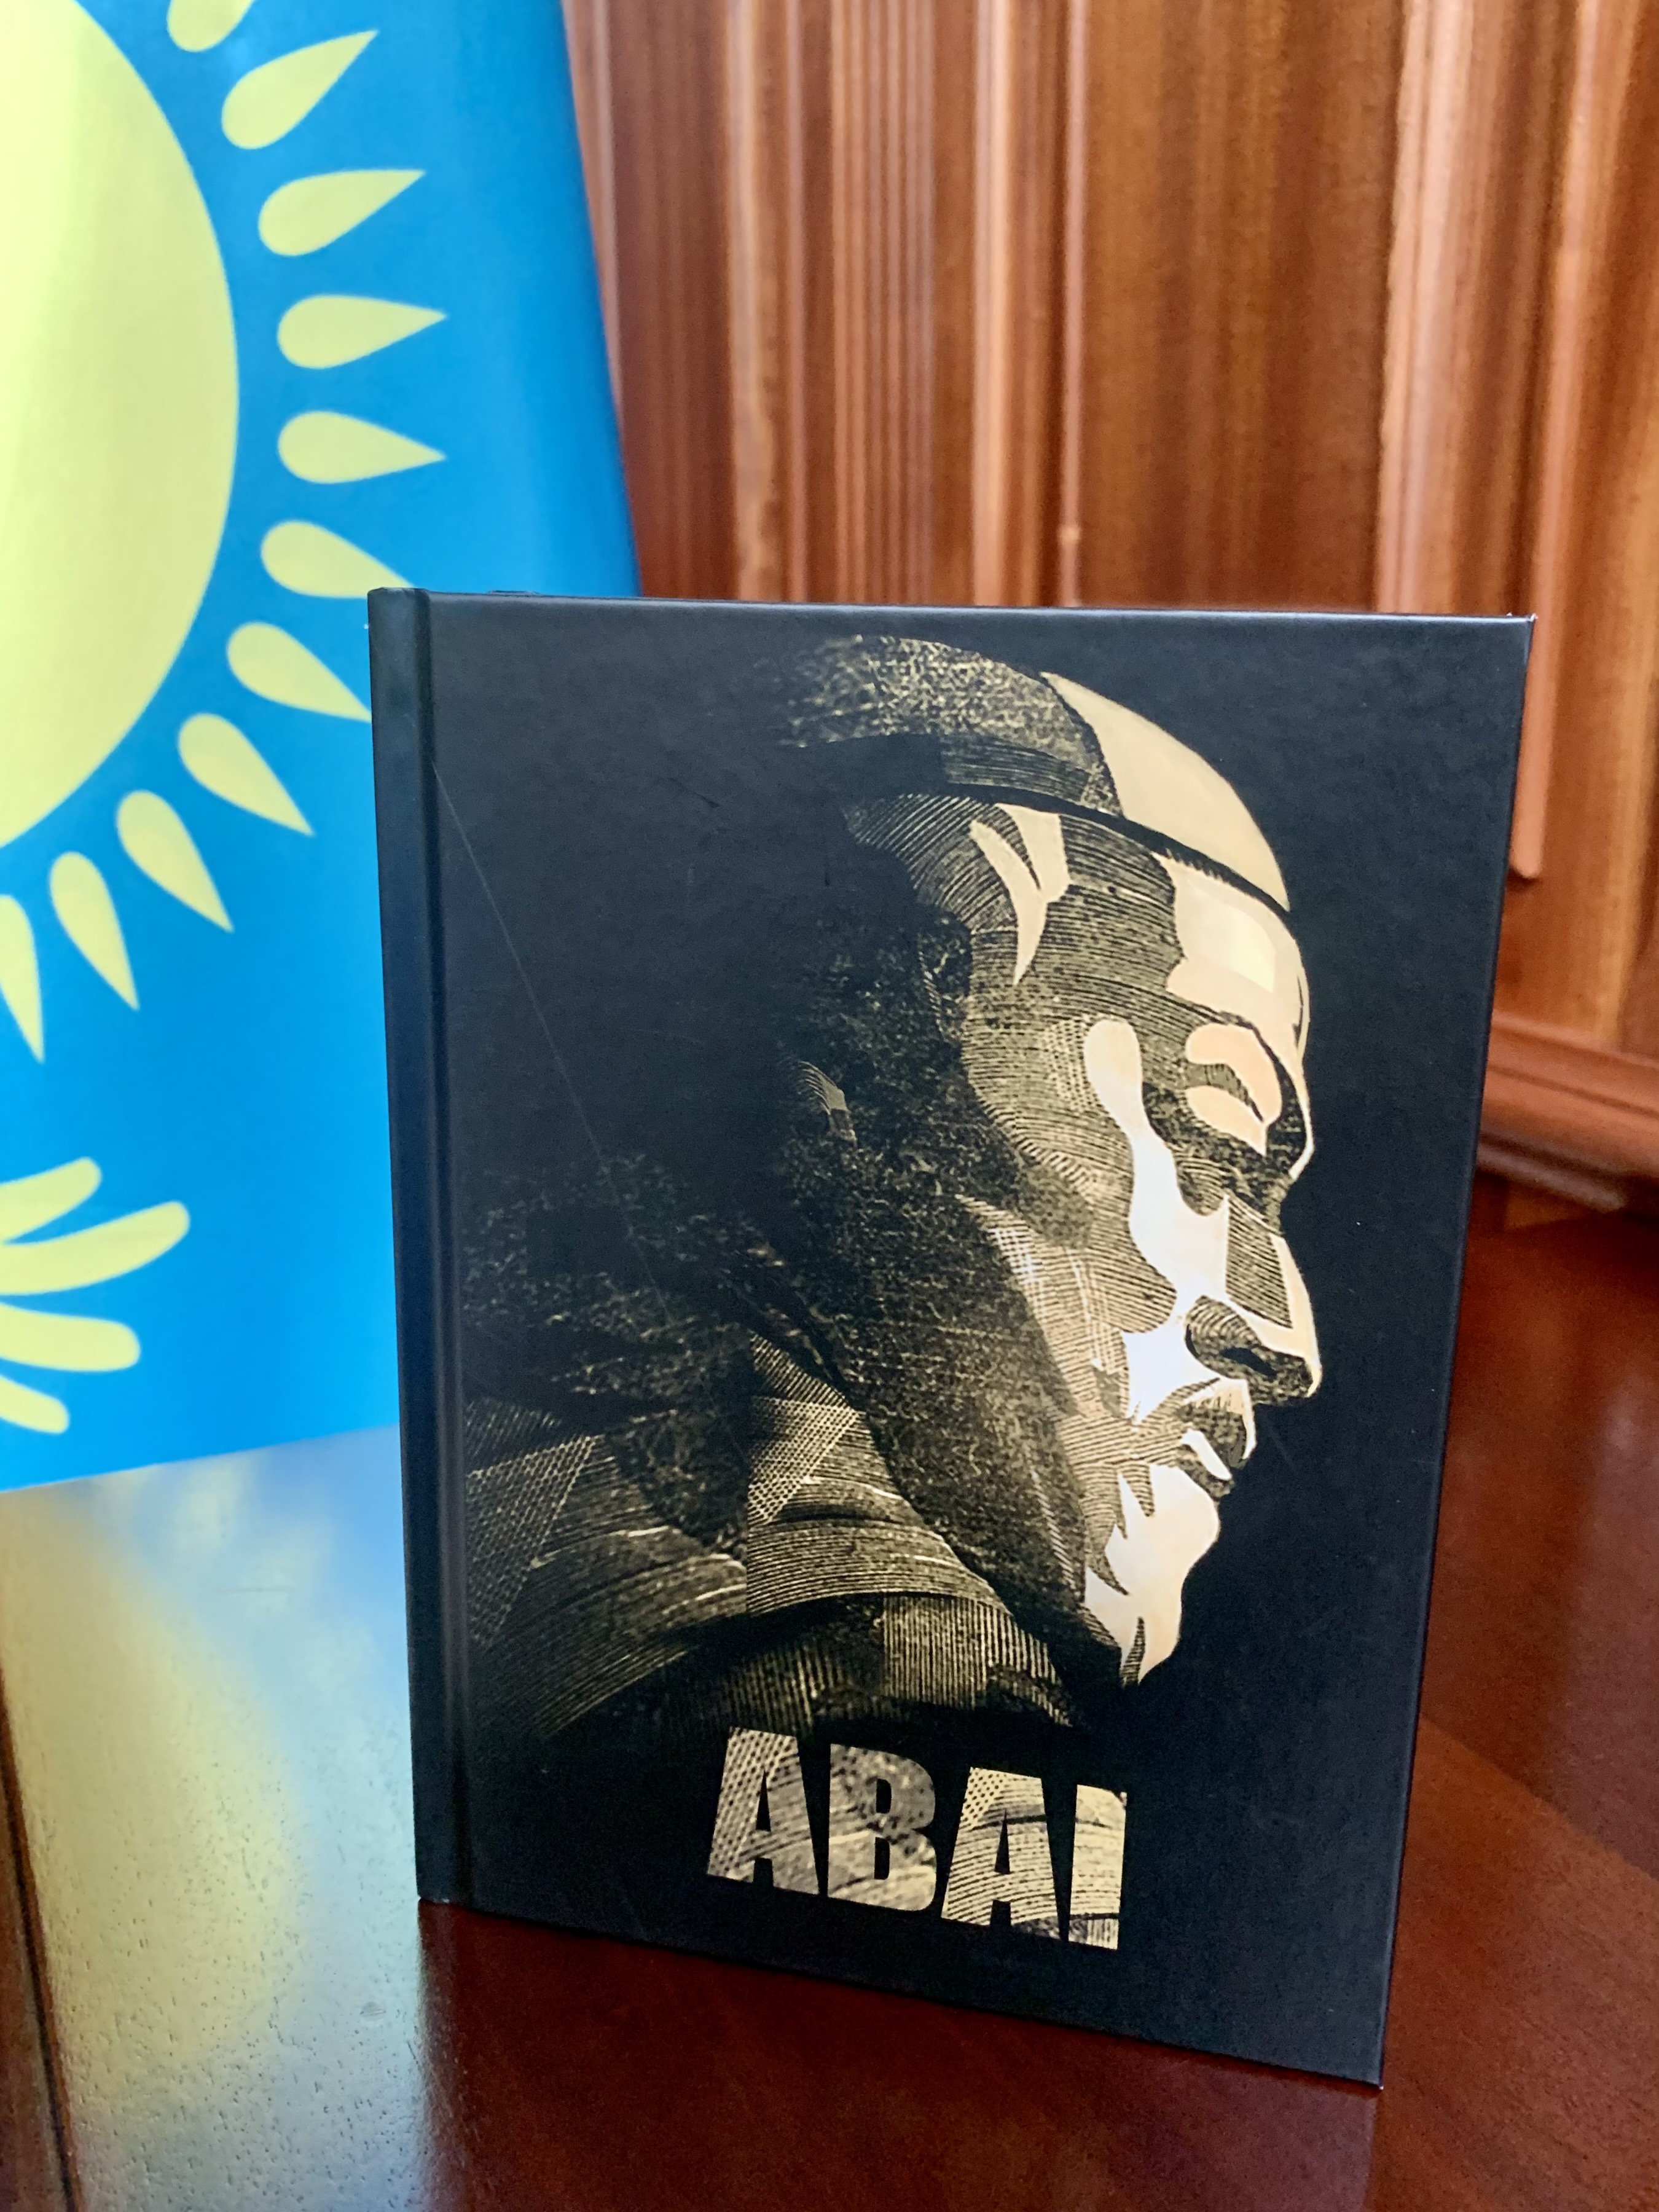 First English-language collection of works of Abai launched in London